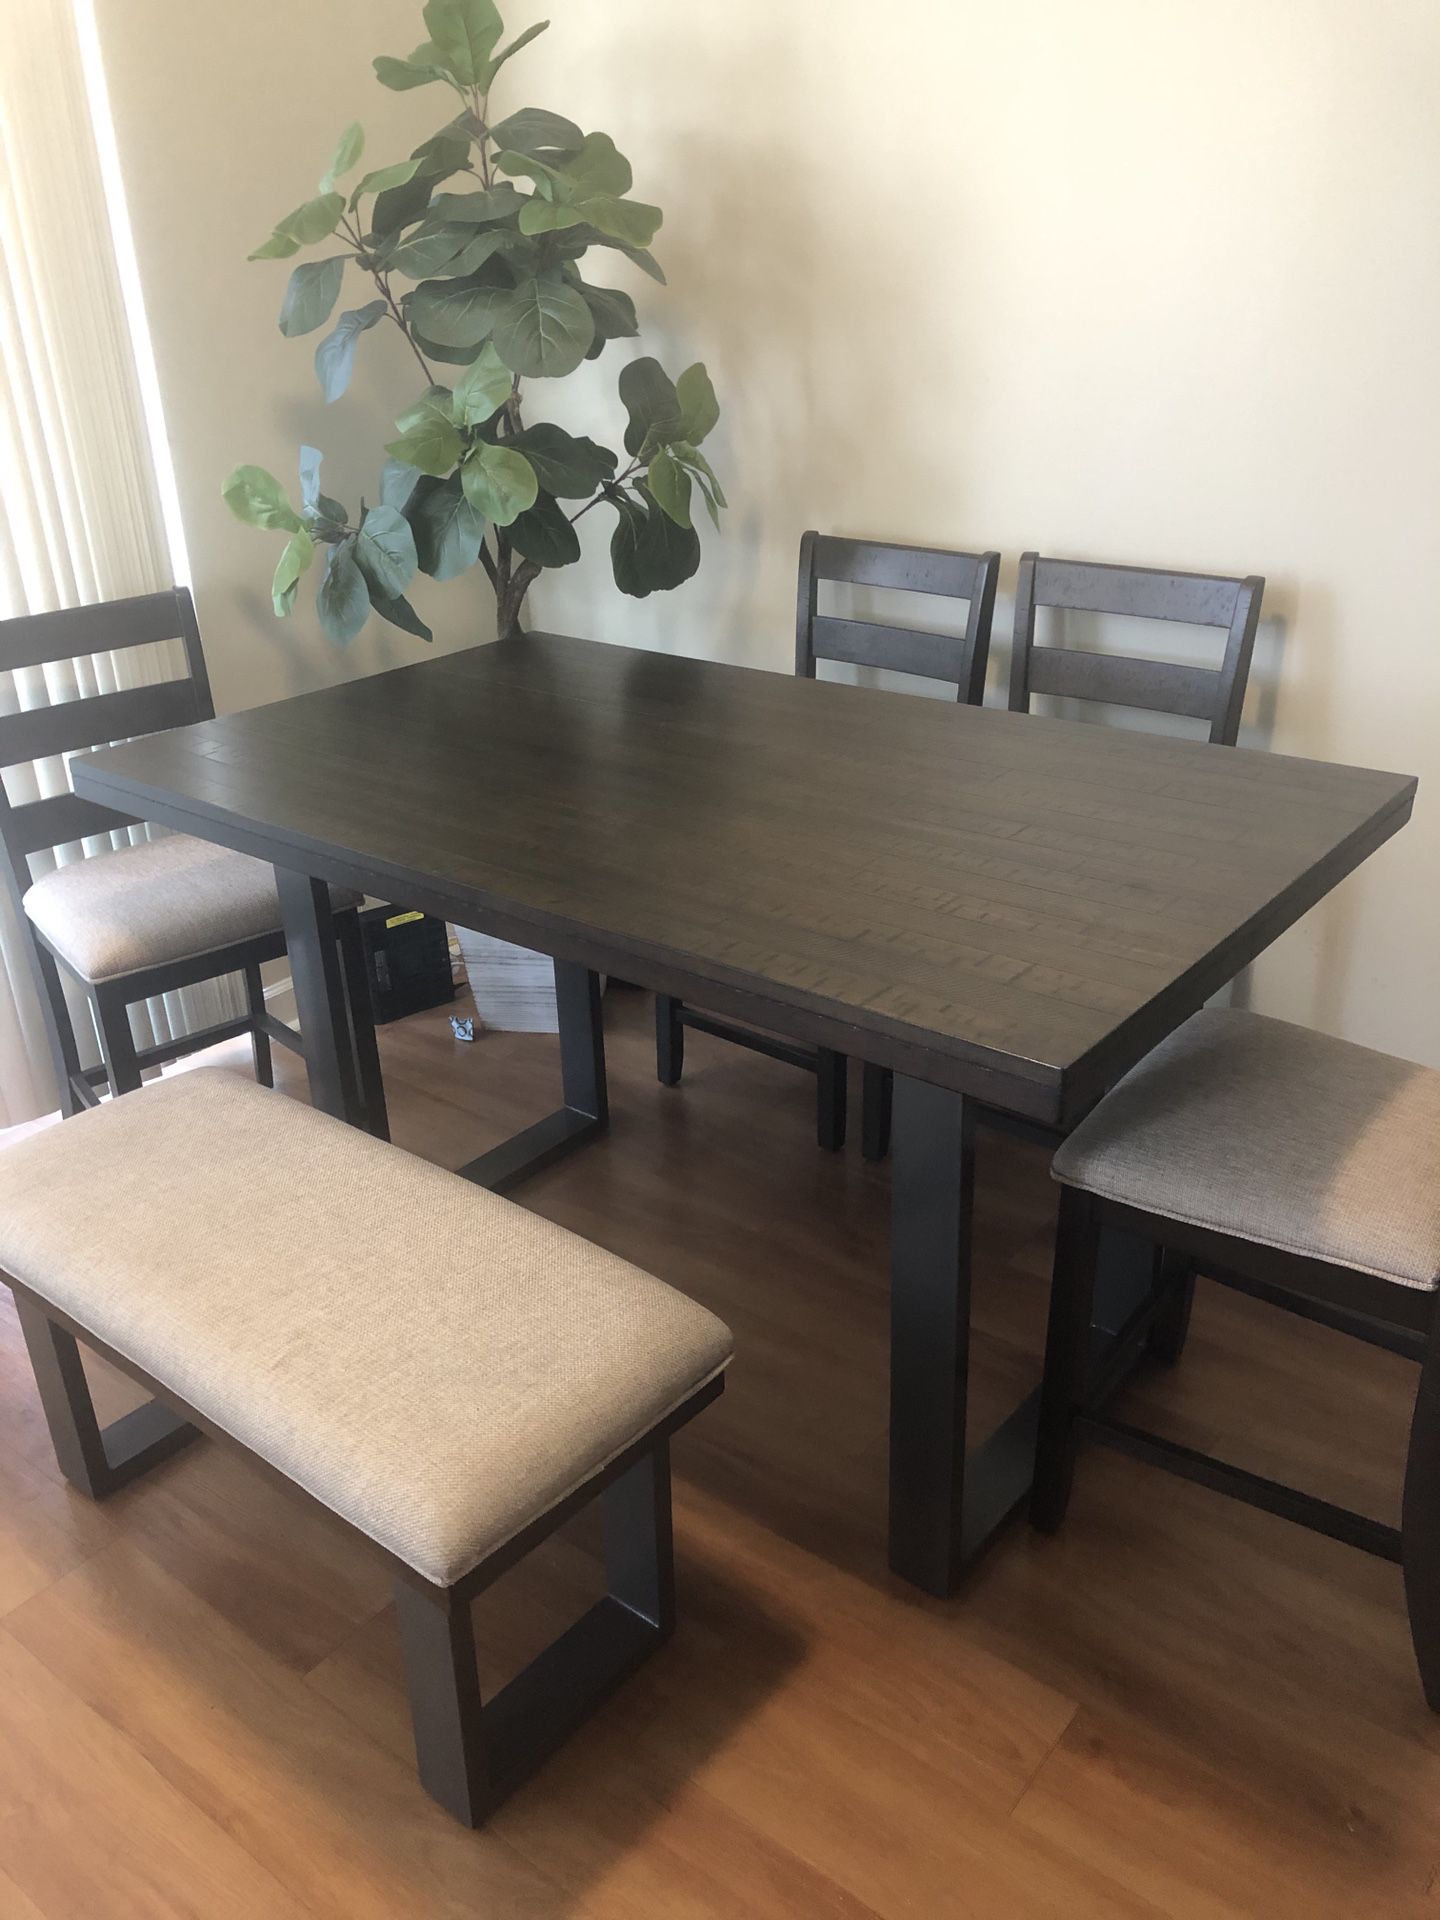 Wood table. Barely used. Excellent condition, comes with chairs and bench